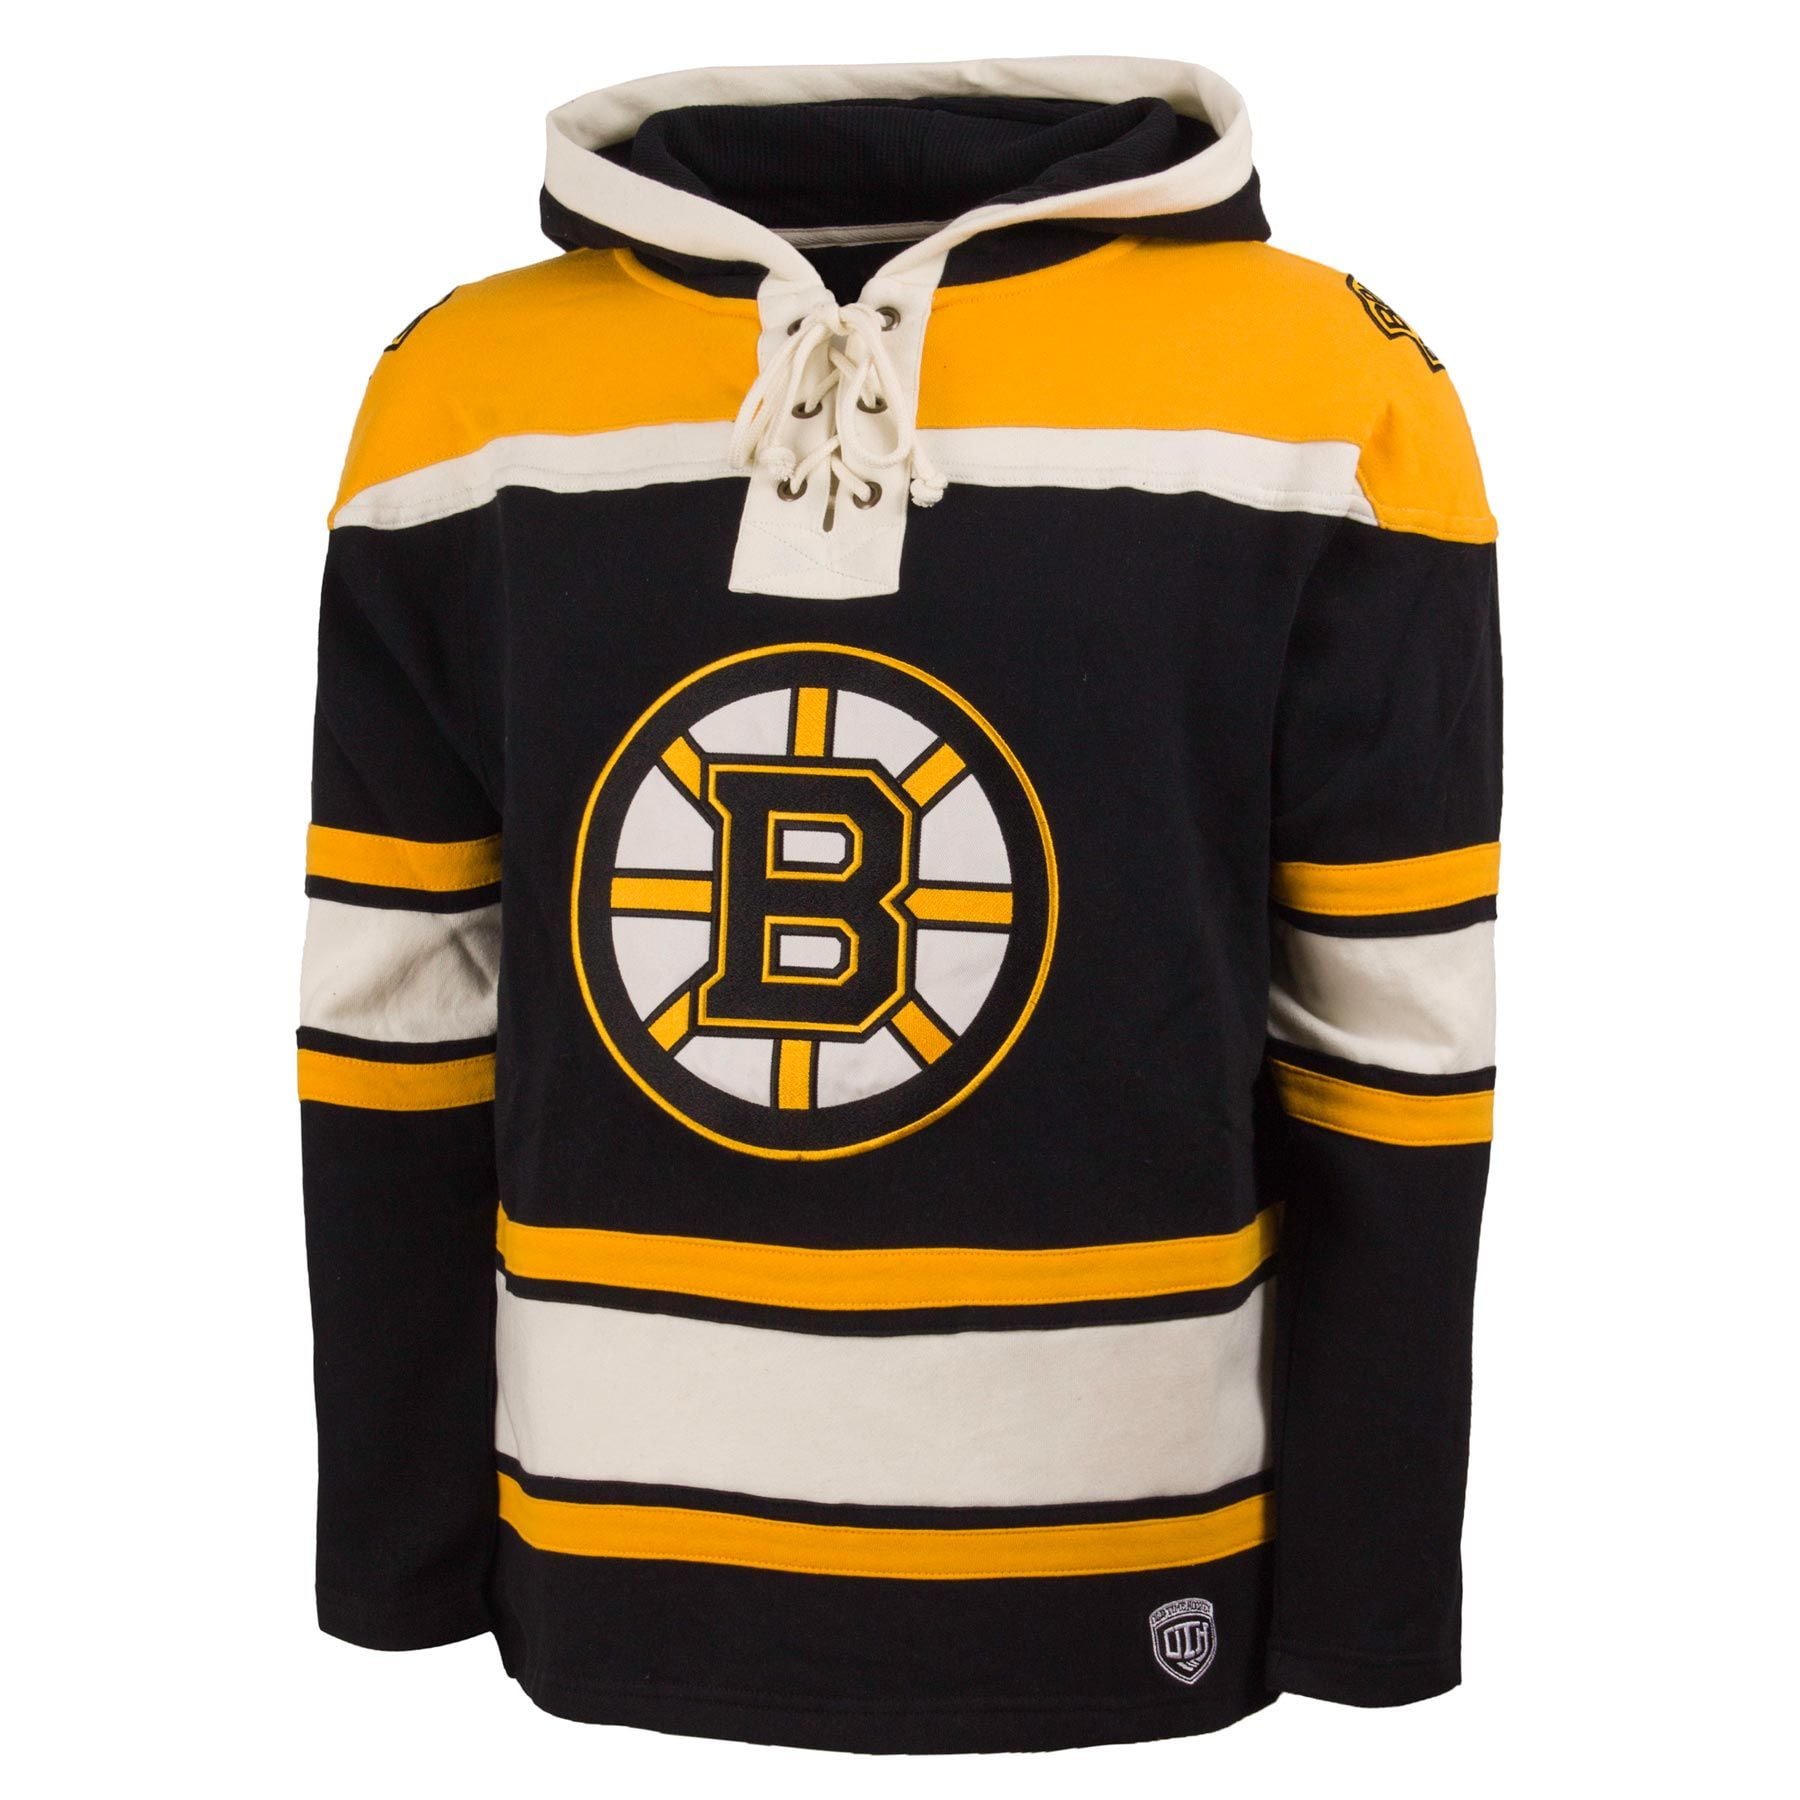 old bruins jersey